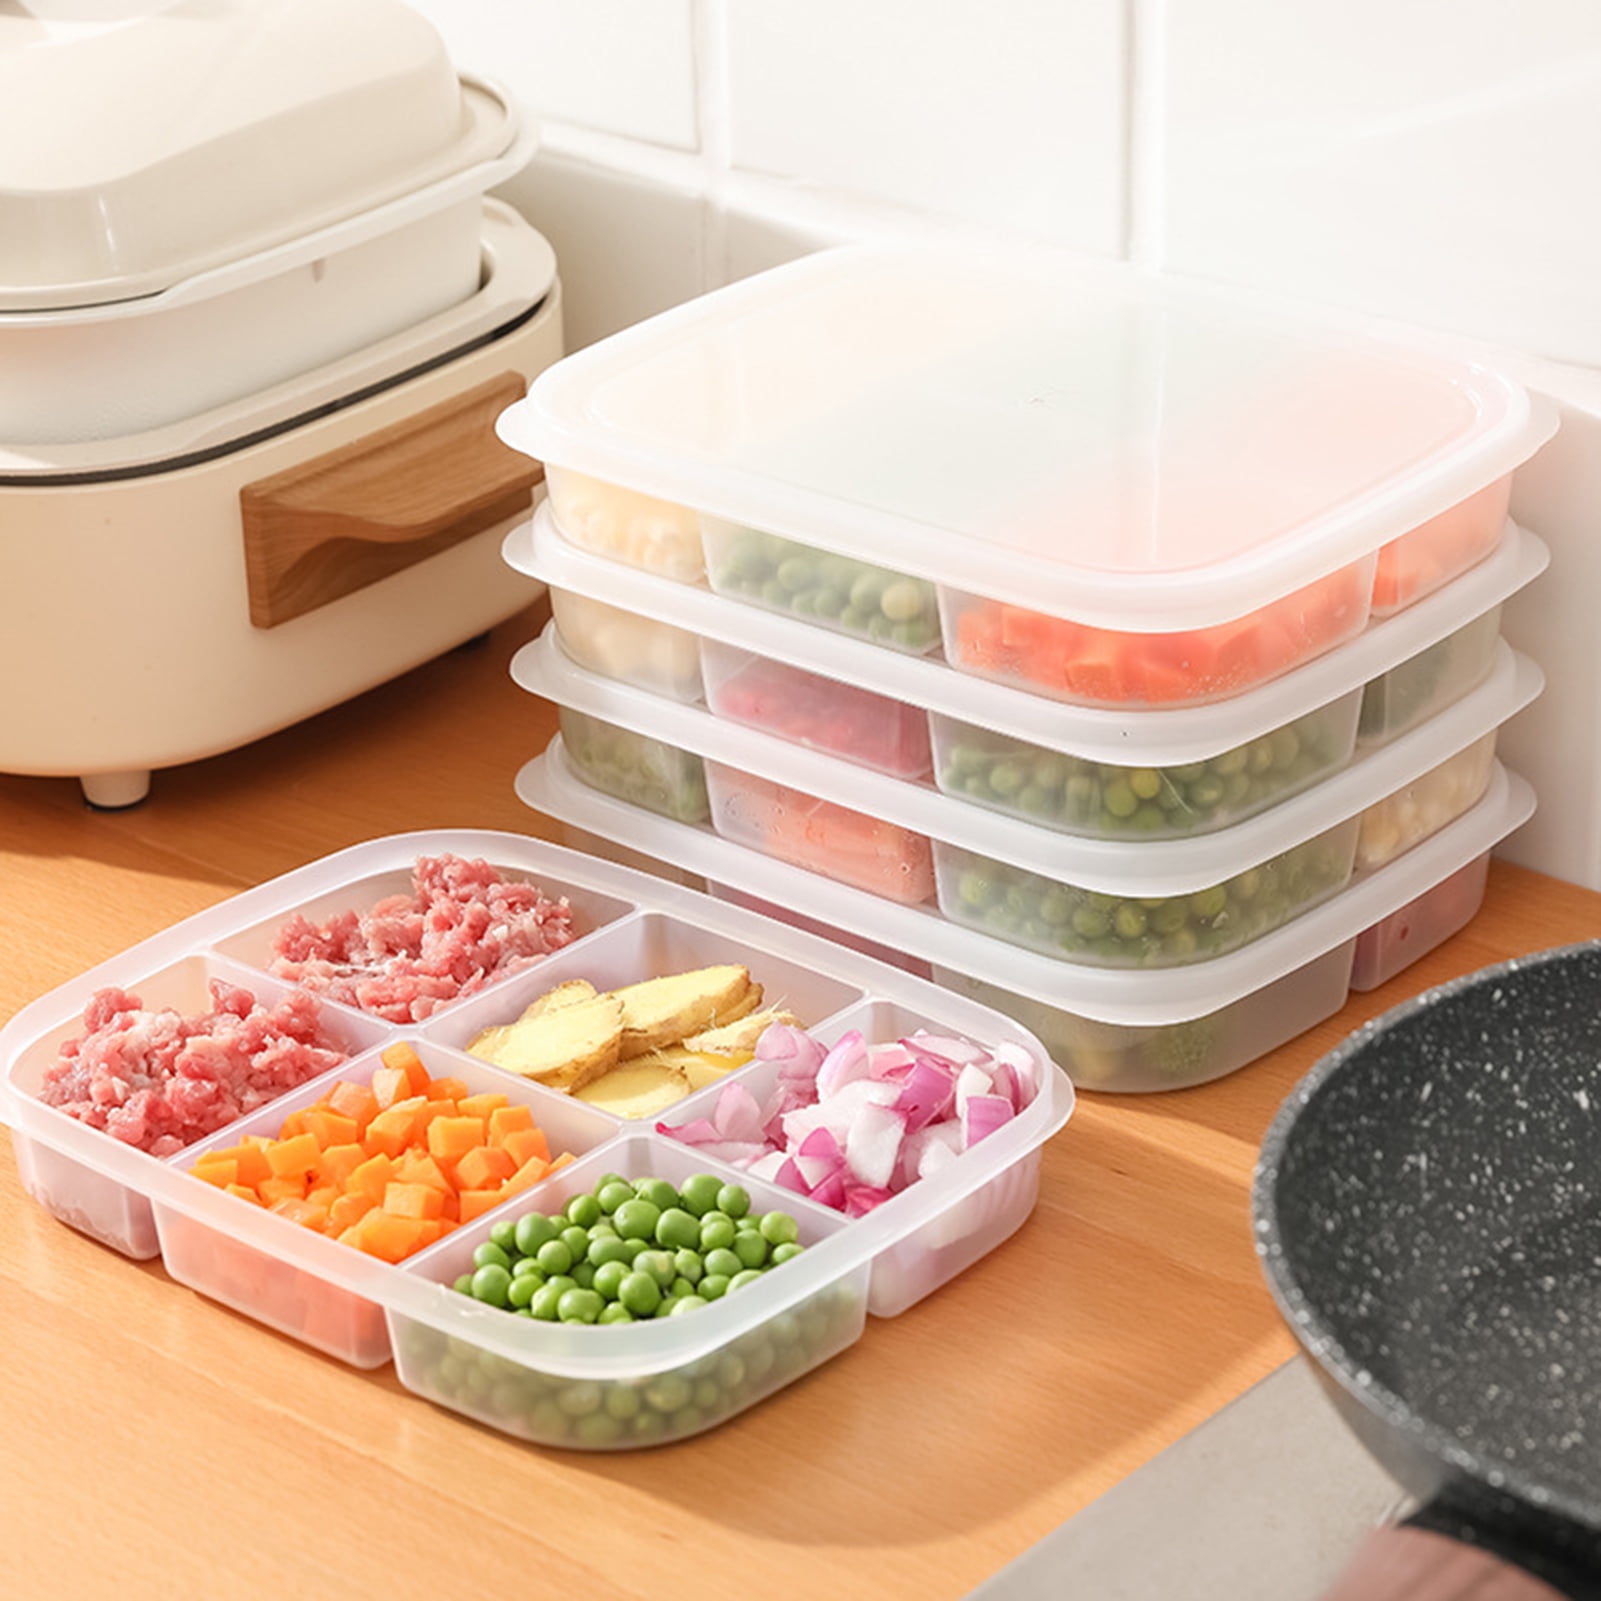 KITHELP 28 Pieces Food Storage Containers with Lids EXTRA LARGE Freezer  Containers for Food BPA-Free Meat Fruit Plastic Containers with lids  Storage